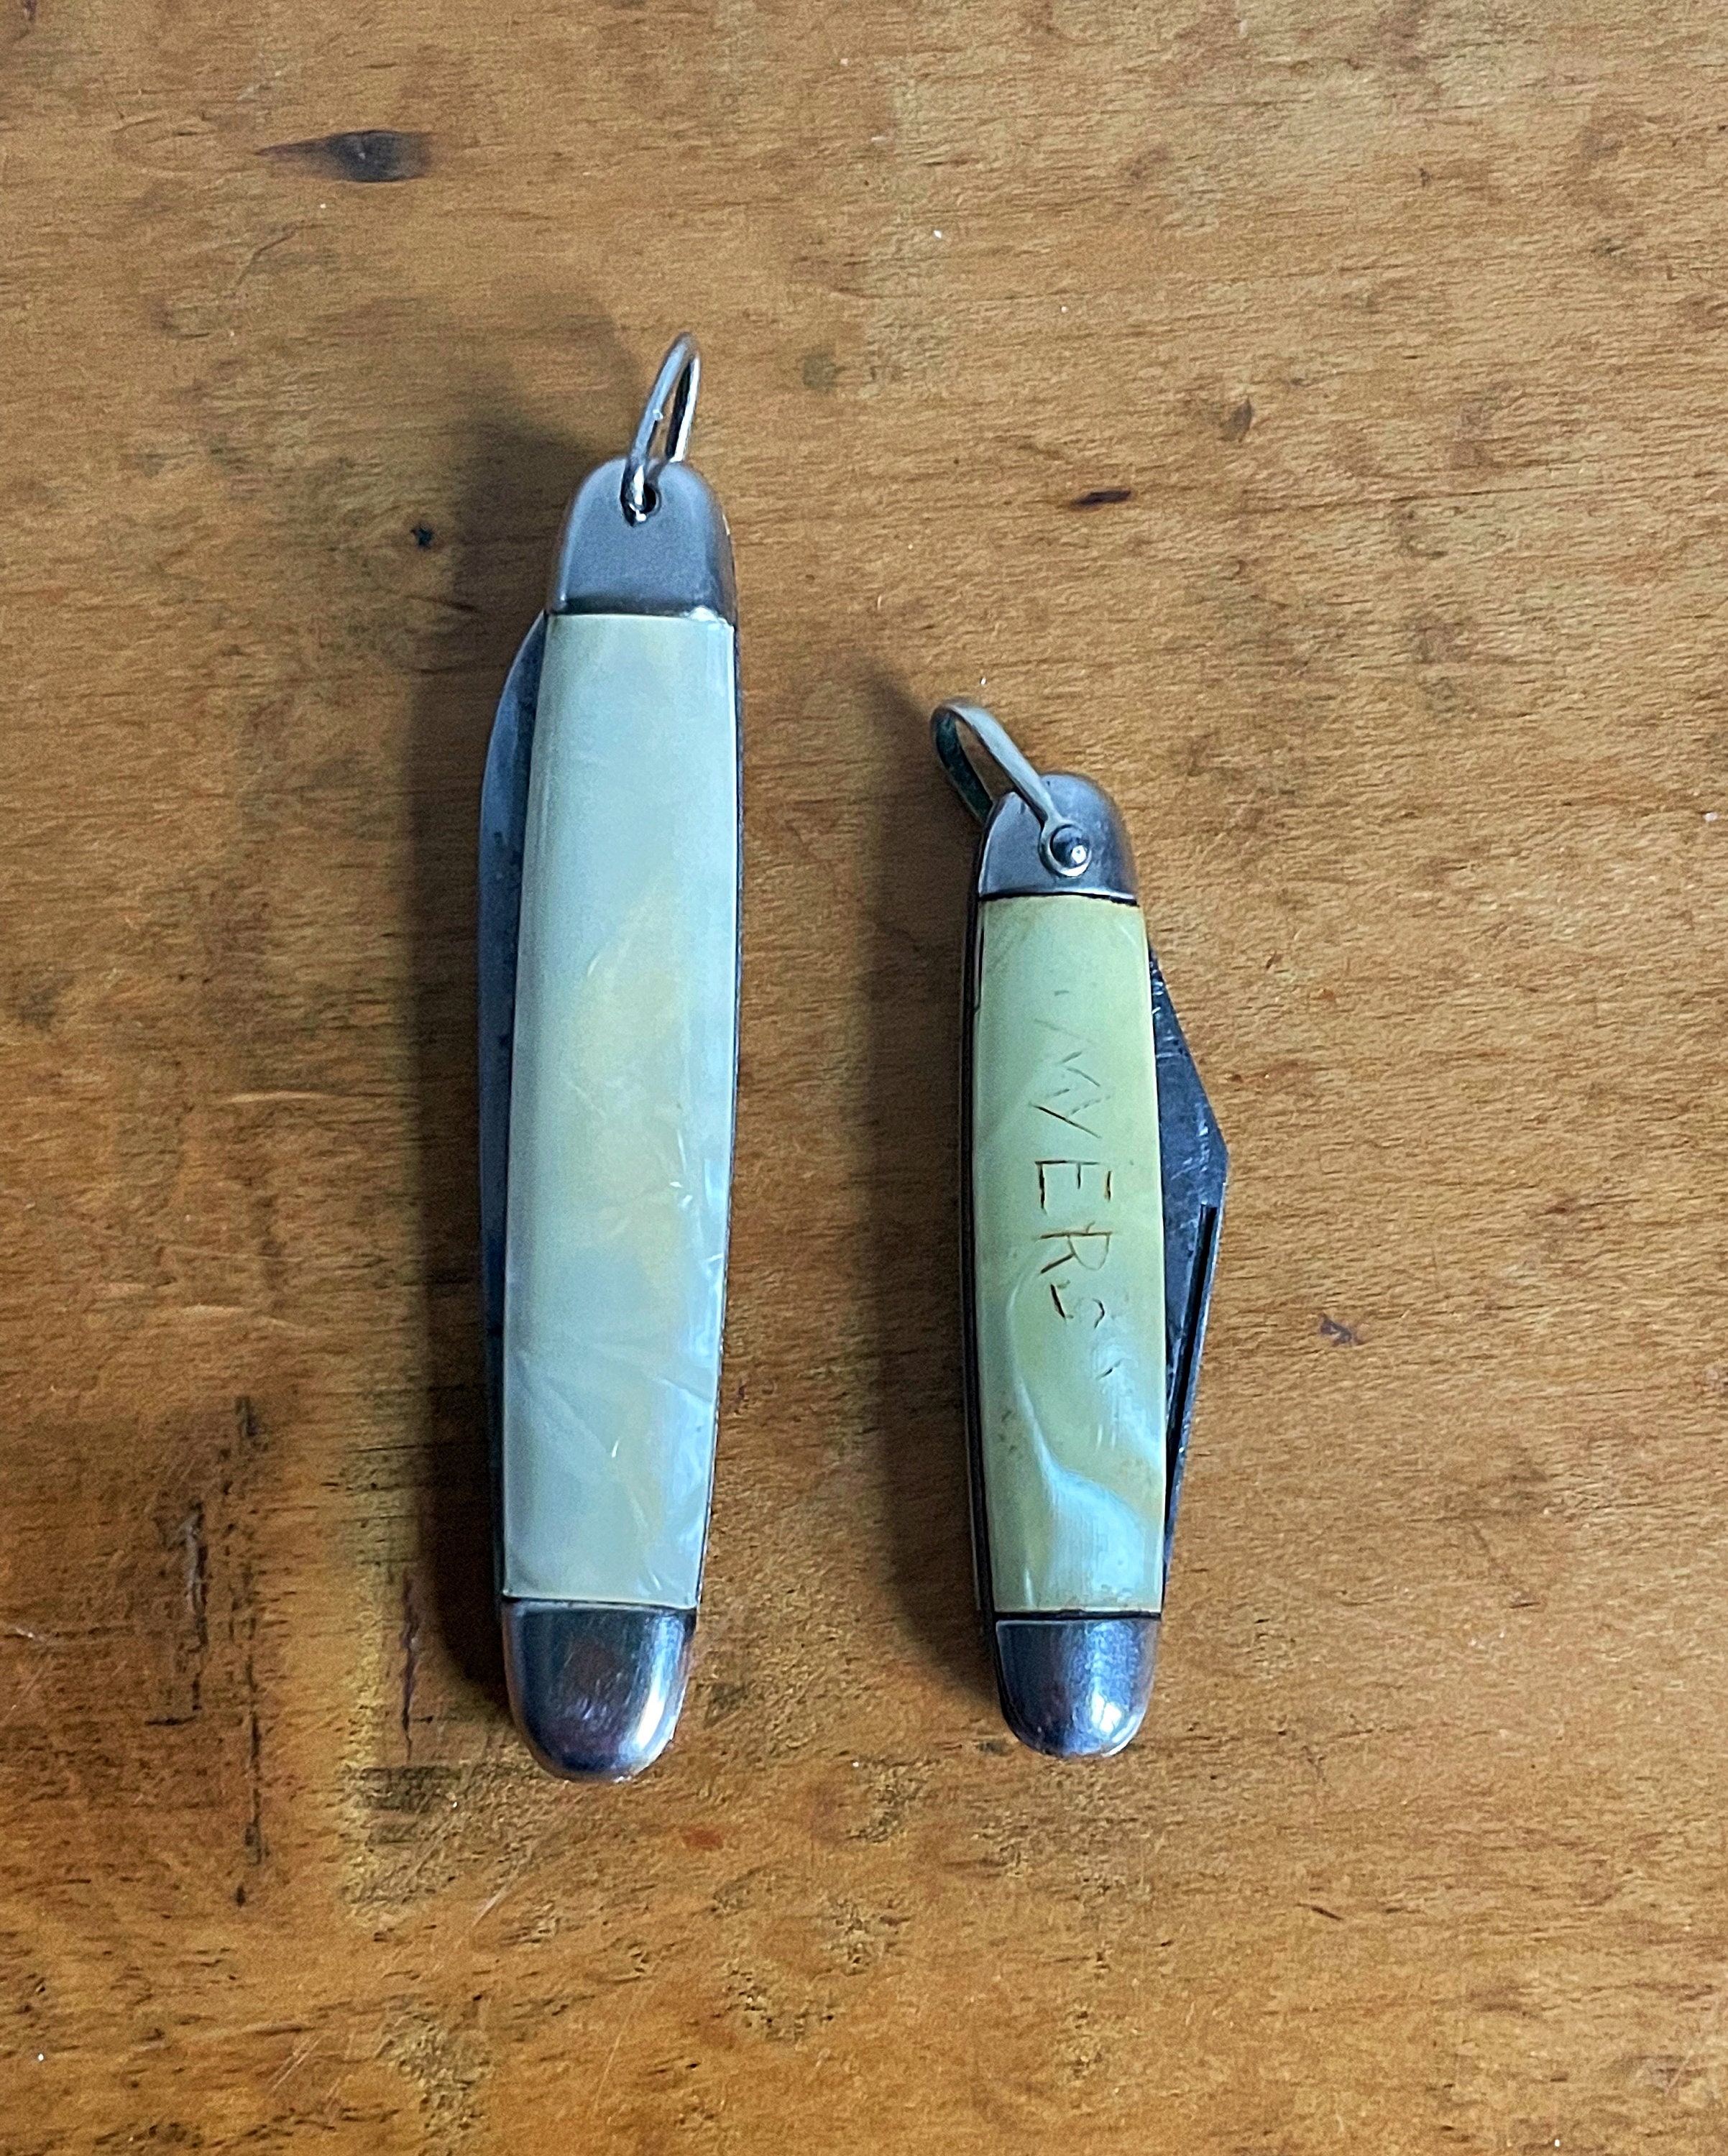 Vintage Pocket Knife Marked Hammer Brand. Two Blade Folding Pen Knife.  Folded Length 3. Good Working Order With Some Surface Rust 